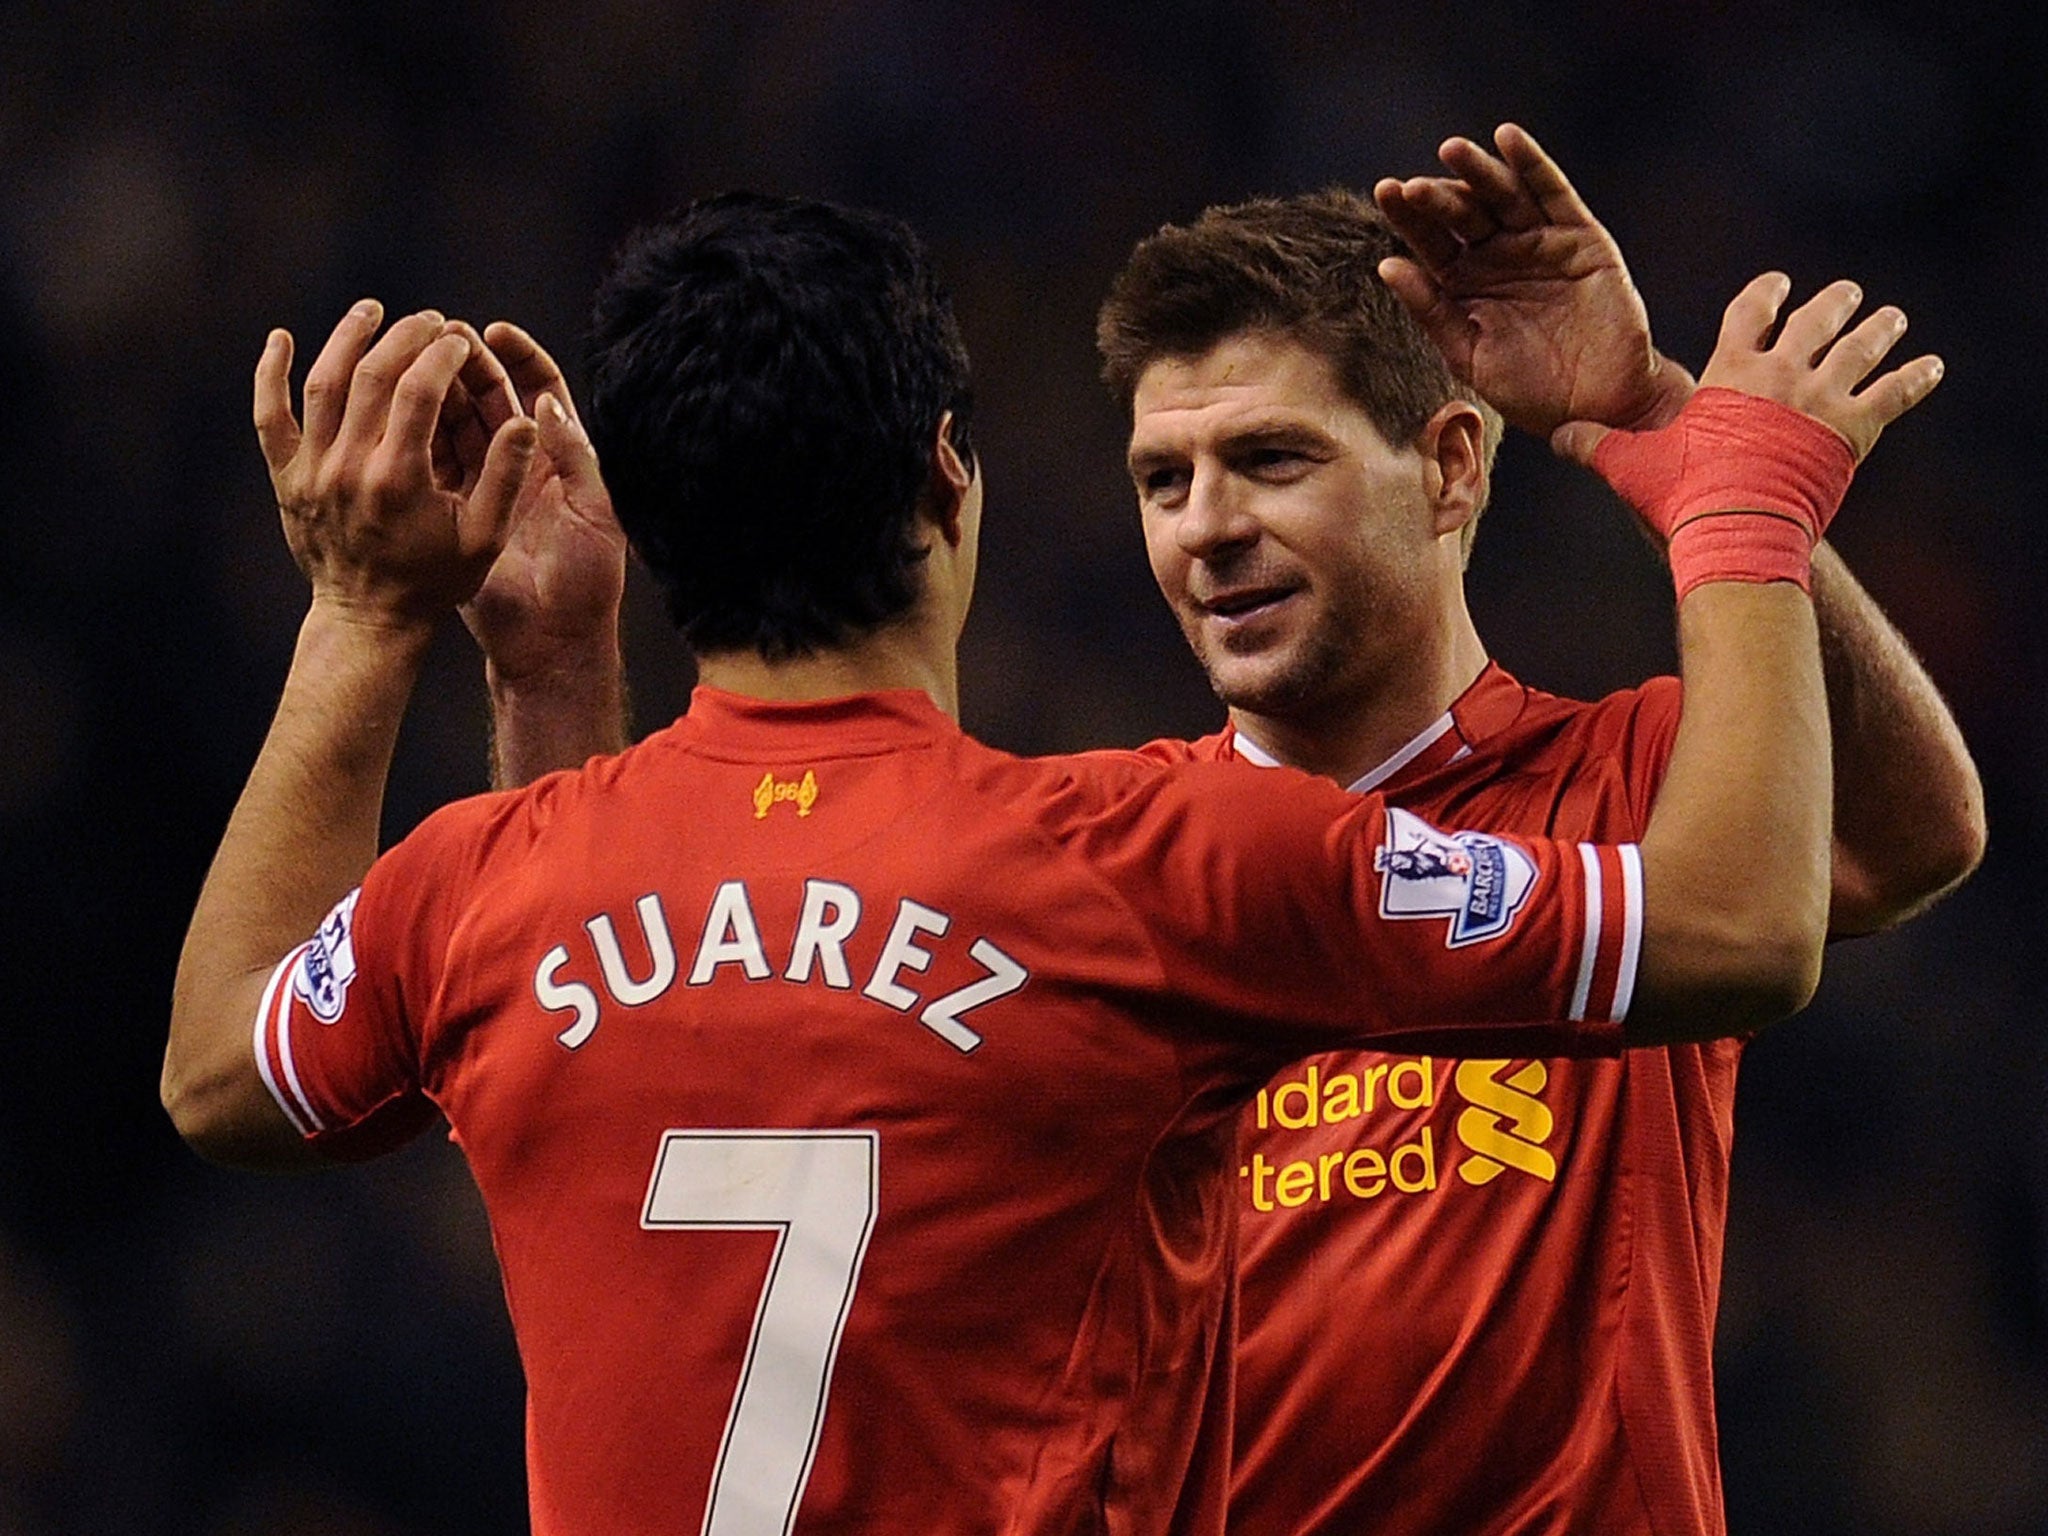 Steven Gerrard (right) and Luis Suarez are expected to start for Liverpool in Tuesday's Merseyside derby